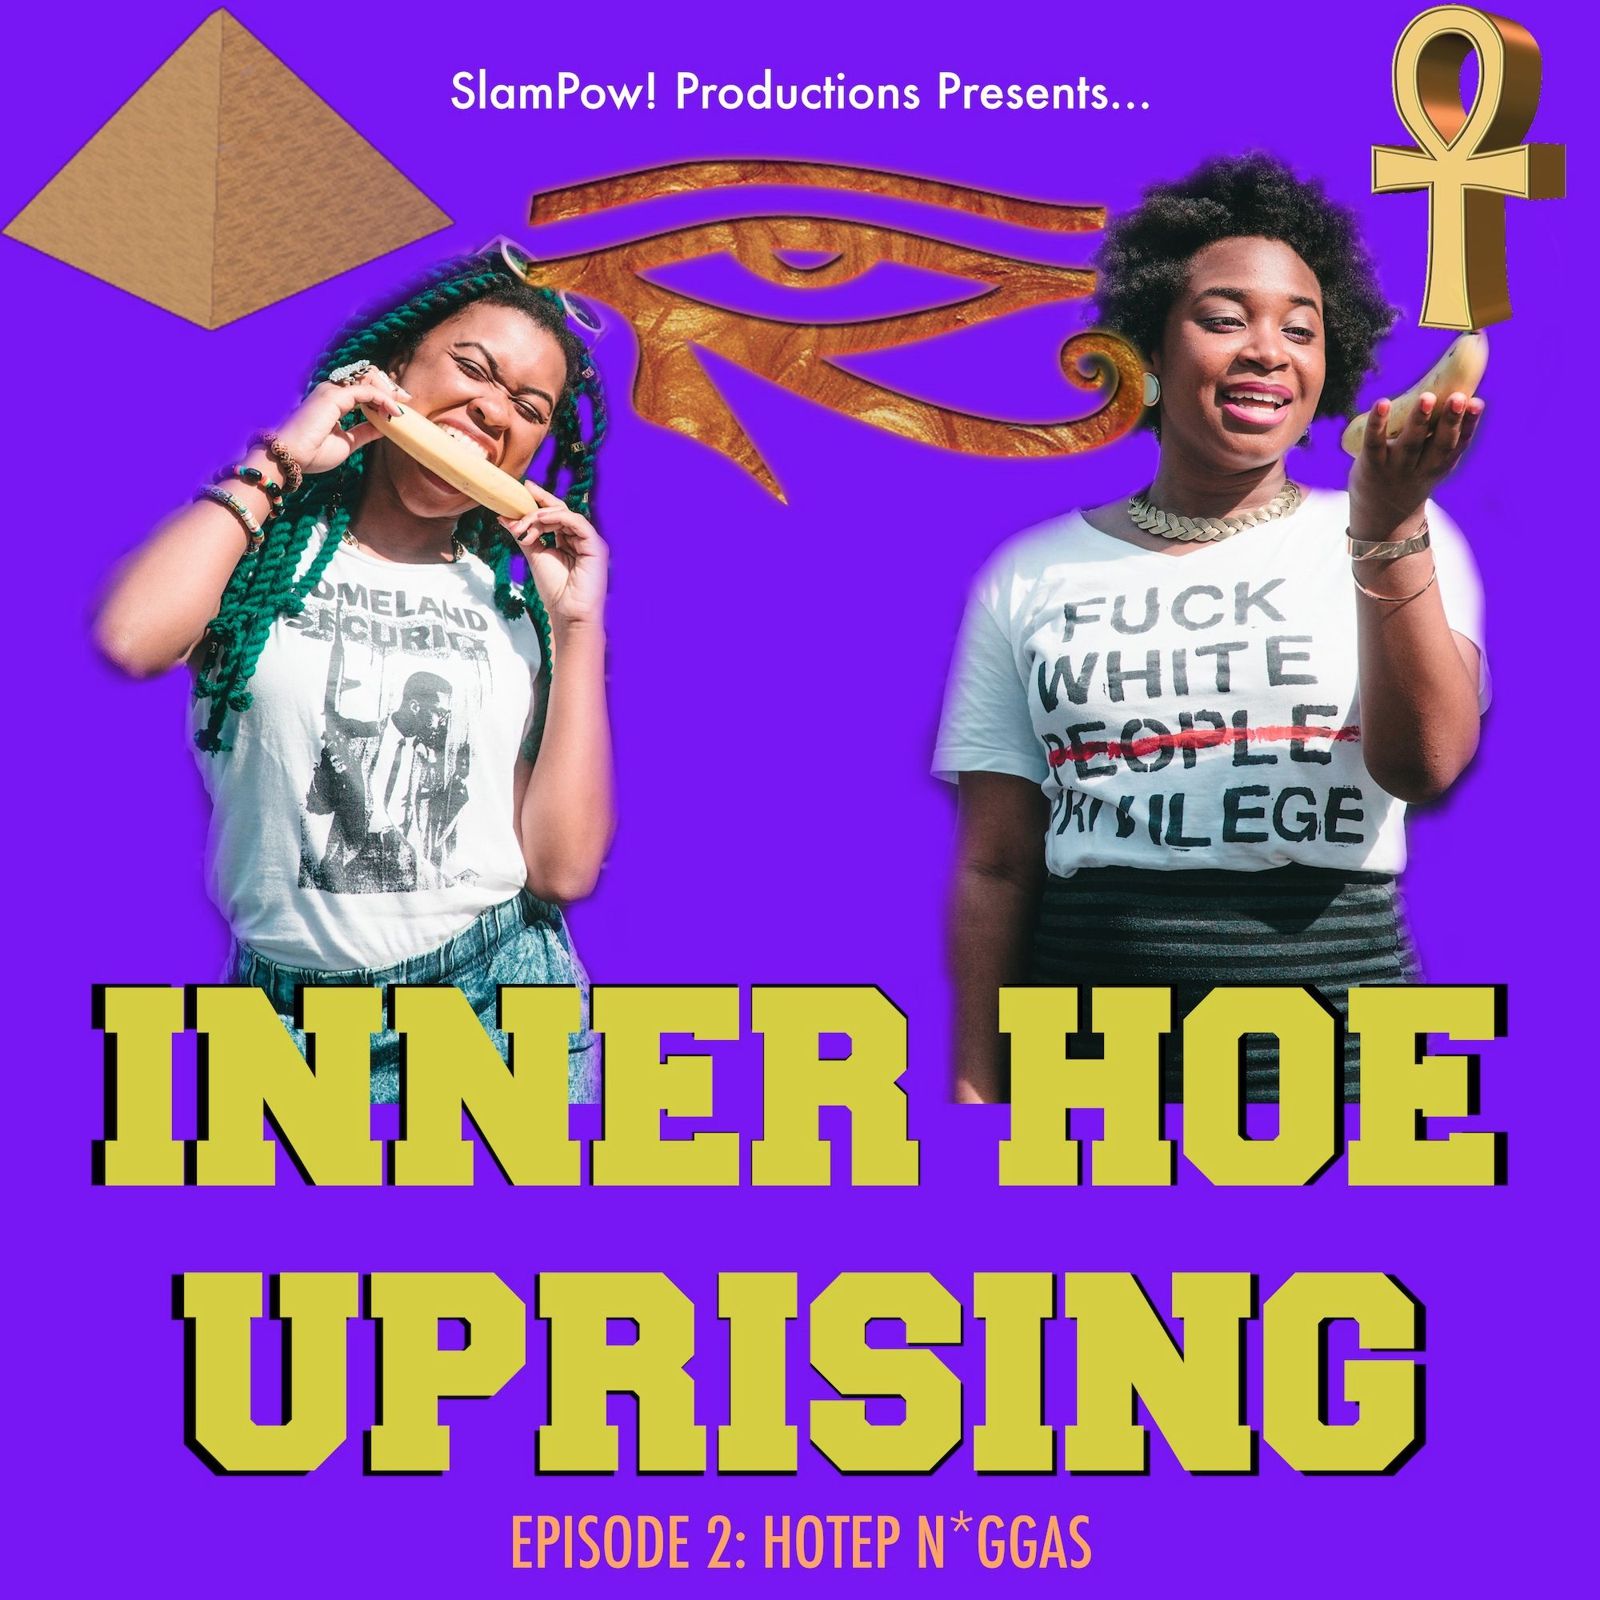 Thumbnail for "S1 Ep2: Hotep Nigg*s".